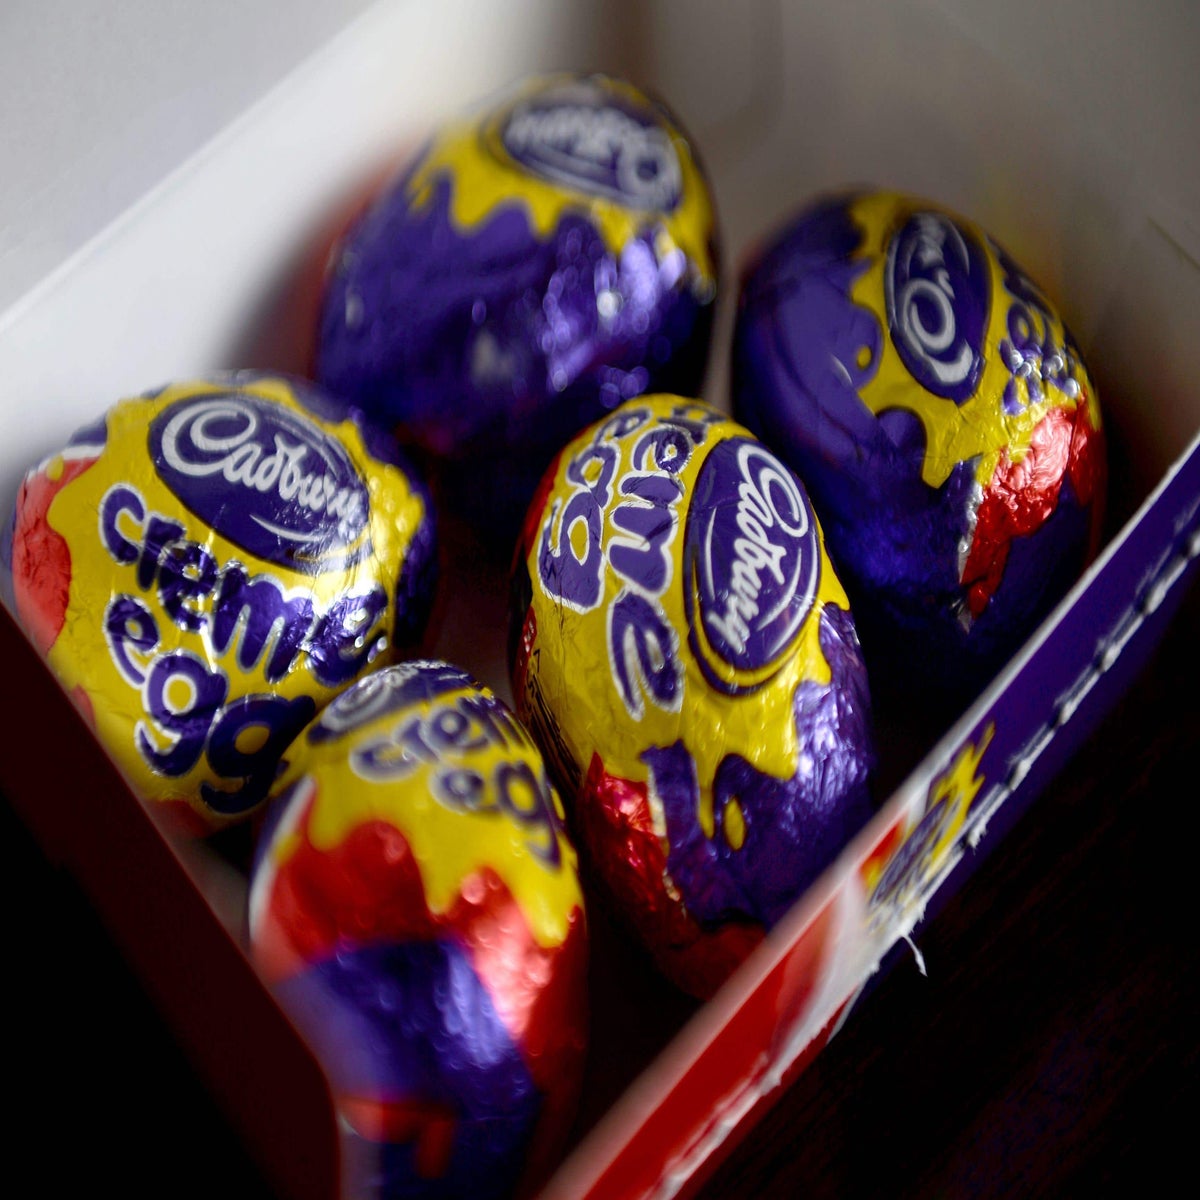 Man charged with theft after trailer-load of 200,000 Creme Eggs stolen ...